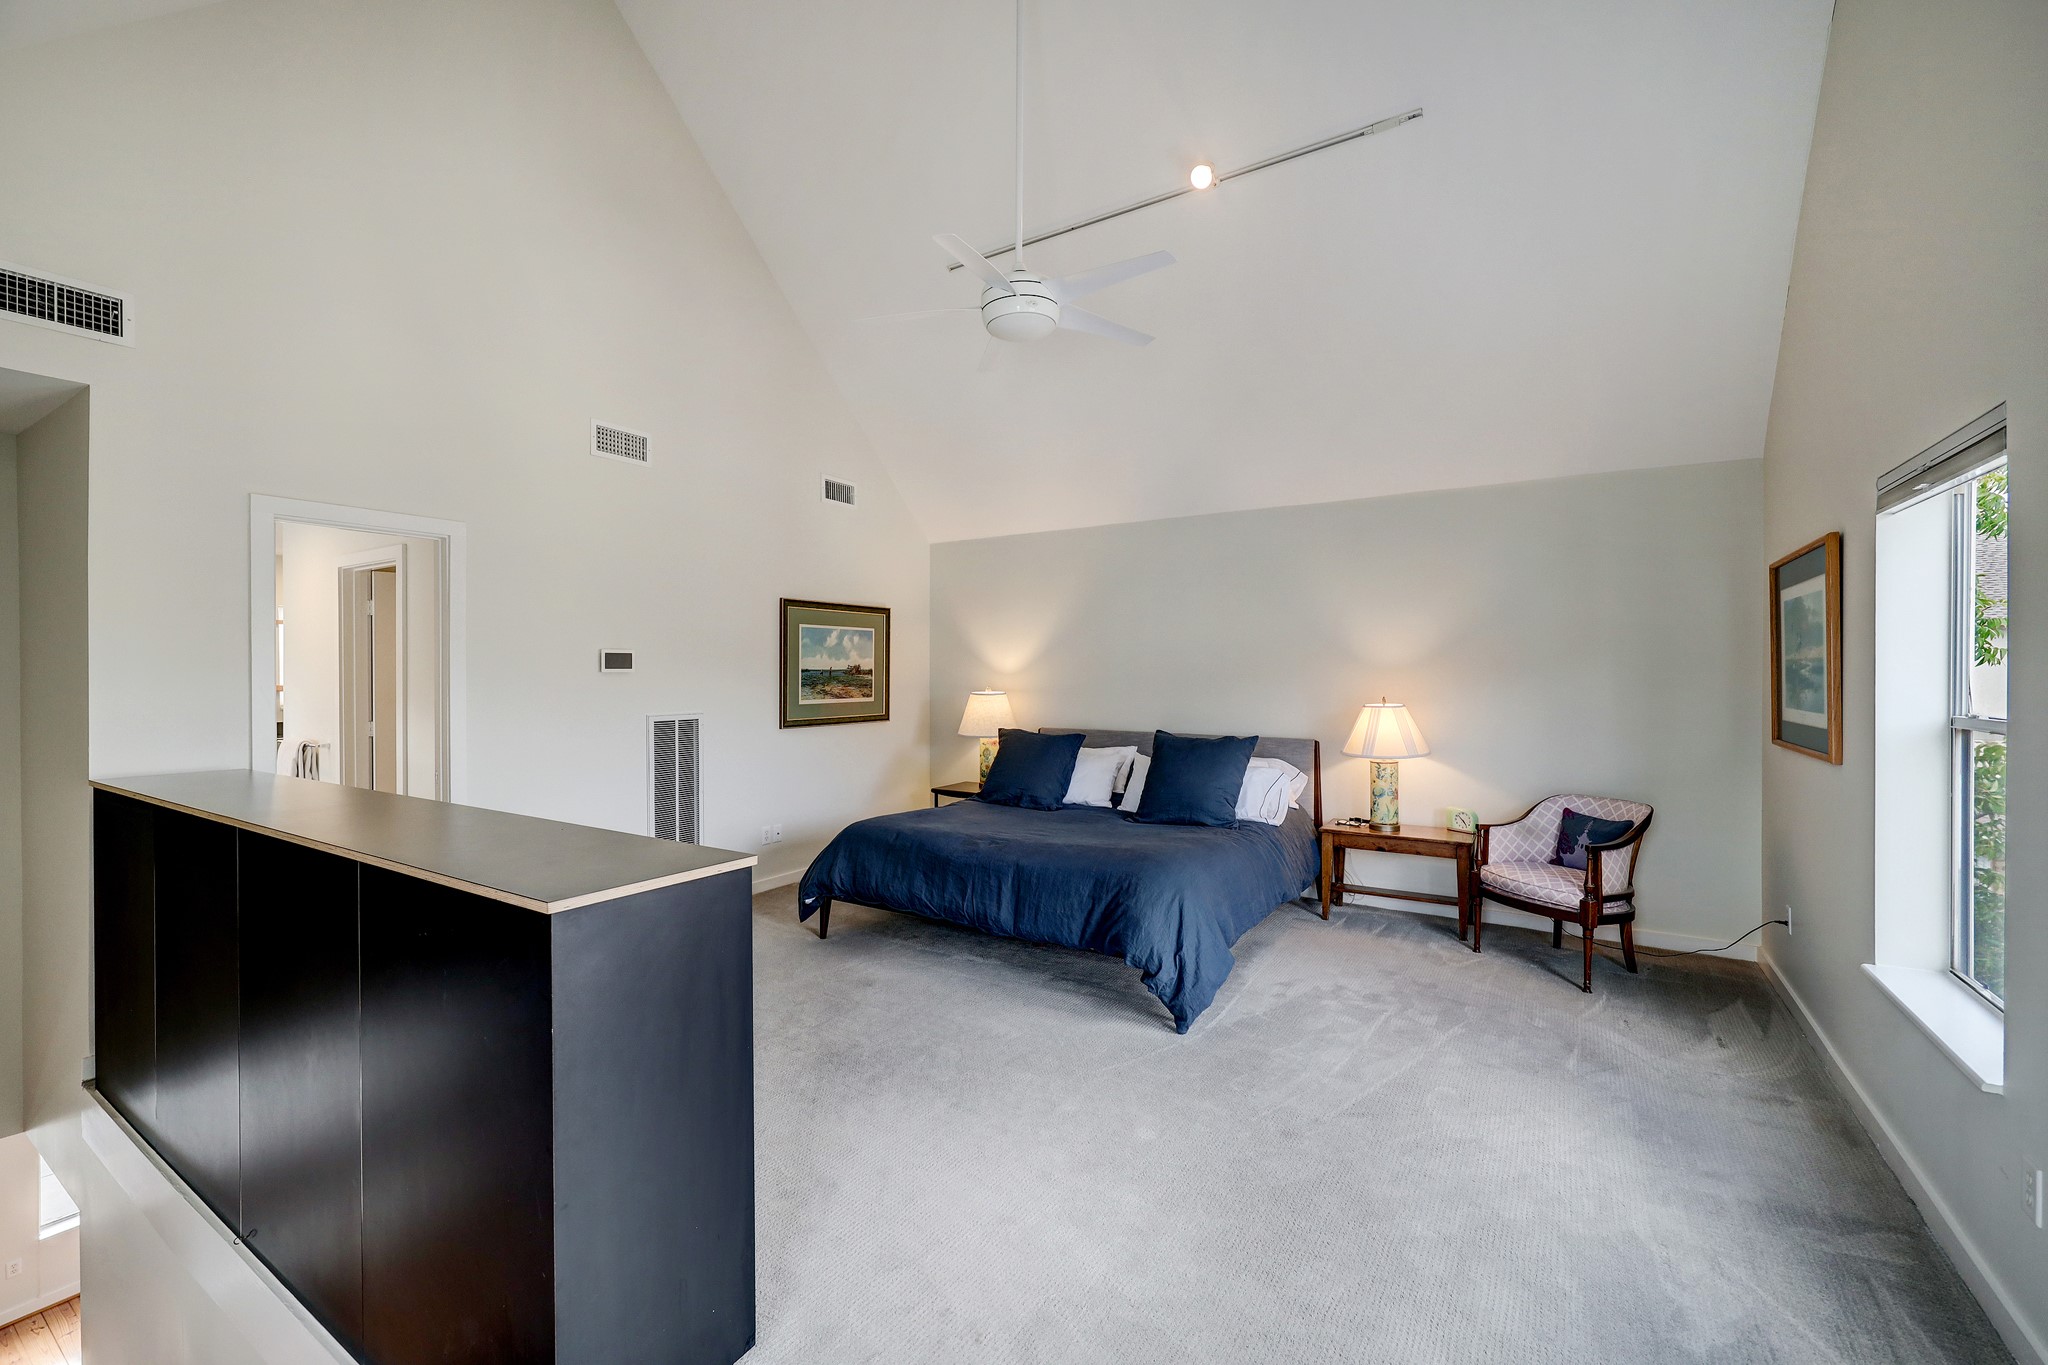 The third floor primary suite enjoys vaulted ceilings and natural light.